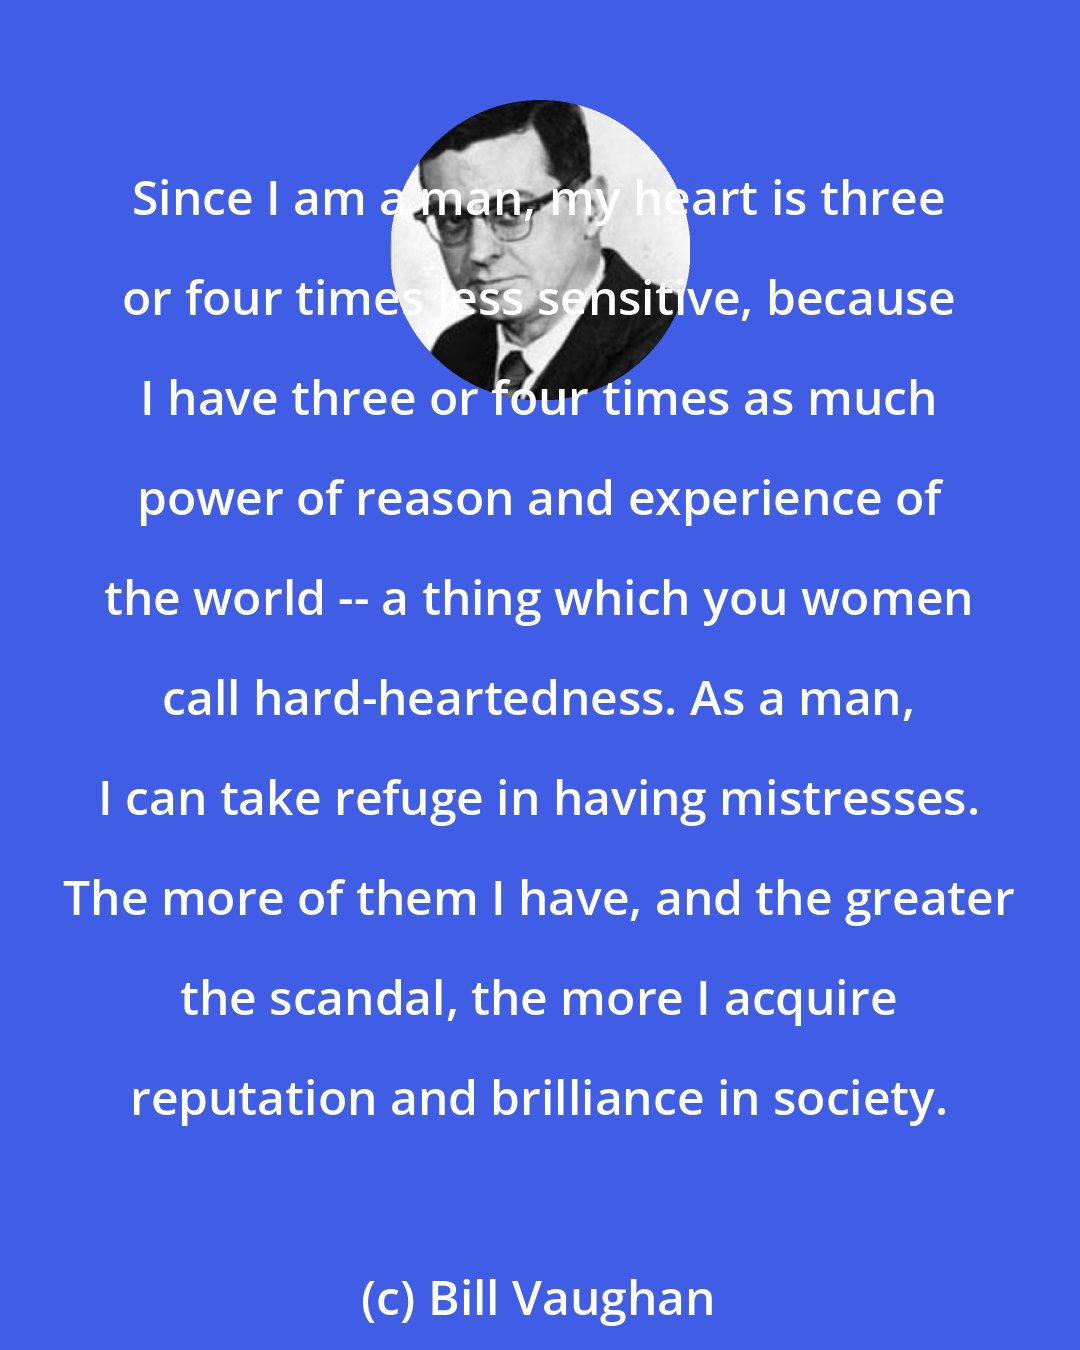 Bill Vaughan: Since I am a man, my heart is three or four times less sensitive, because I have three or four times as much power of reason and experience of the world -- a thing which you women call hard-heartedness. As a man, I can take refuge in having mistresses. The more of them I have, and the greater the scandal, the more I acquire reputation and brilliance in society.